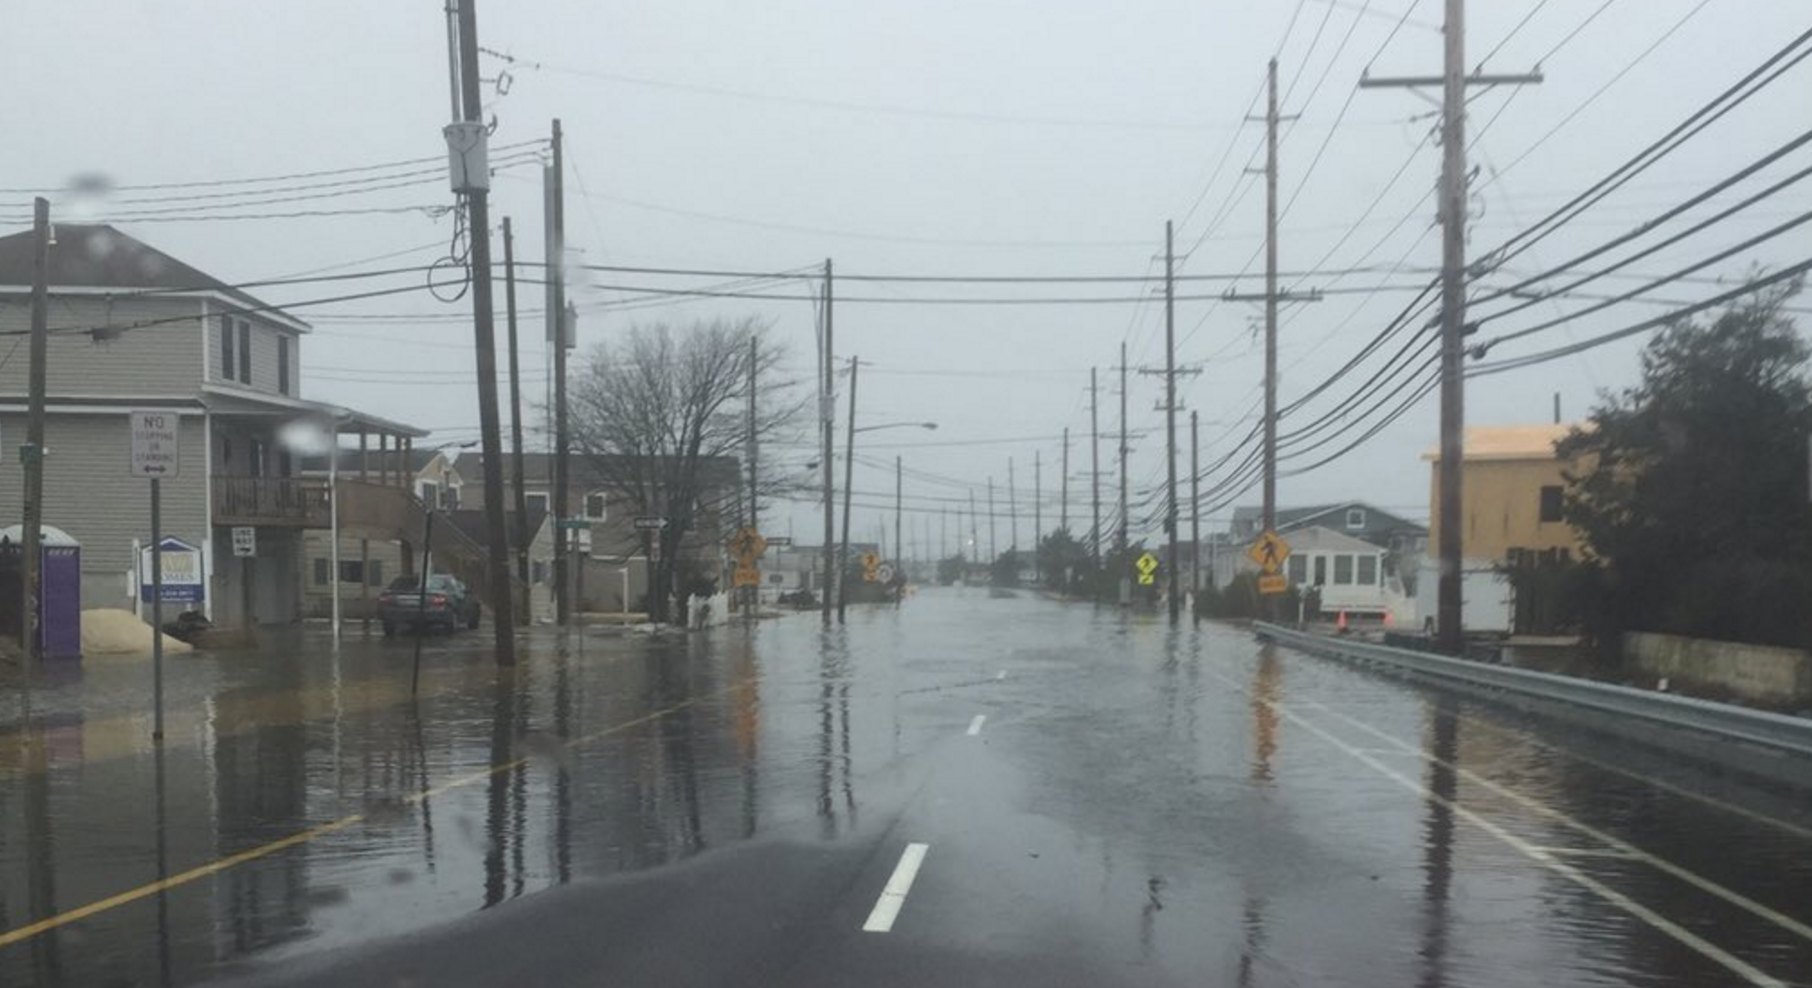  Route 35 northbound in in the Lavallette area late this morning. (Photo: @Greg_NJ via Twitter) 